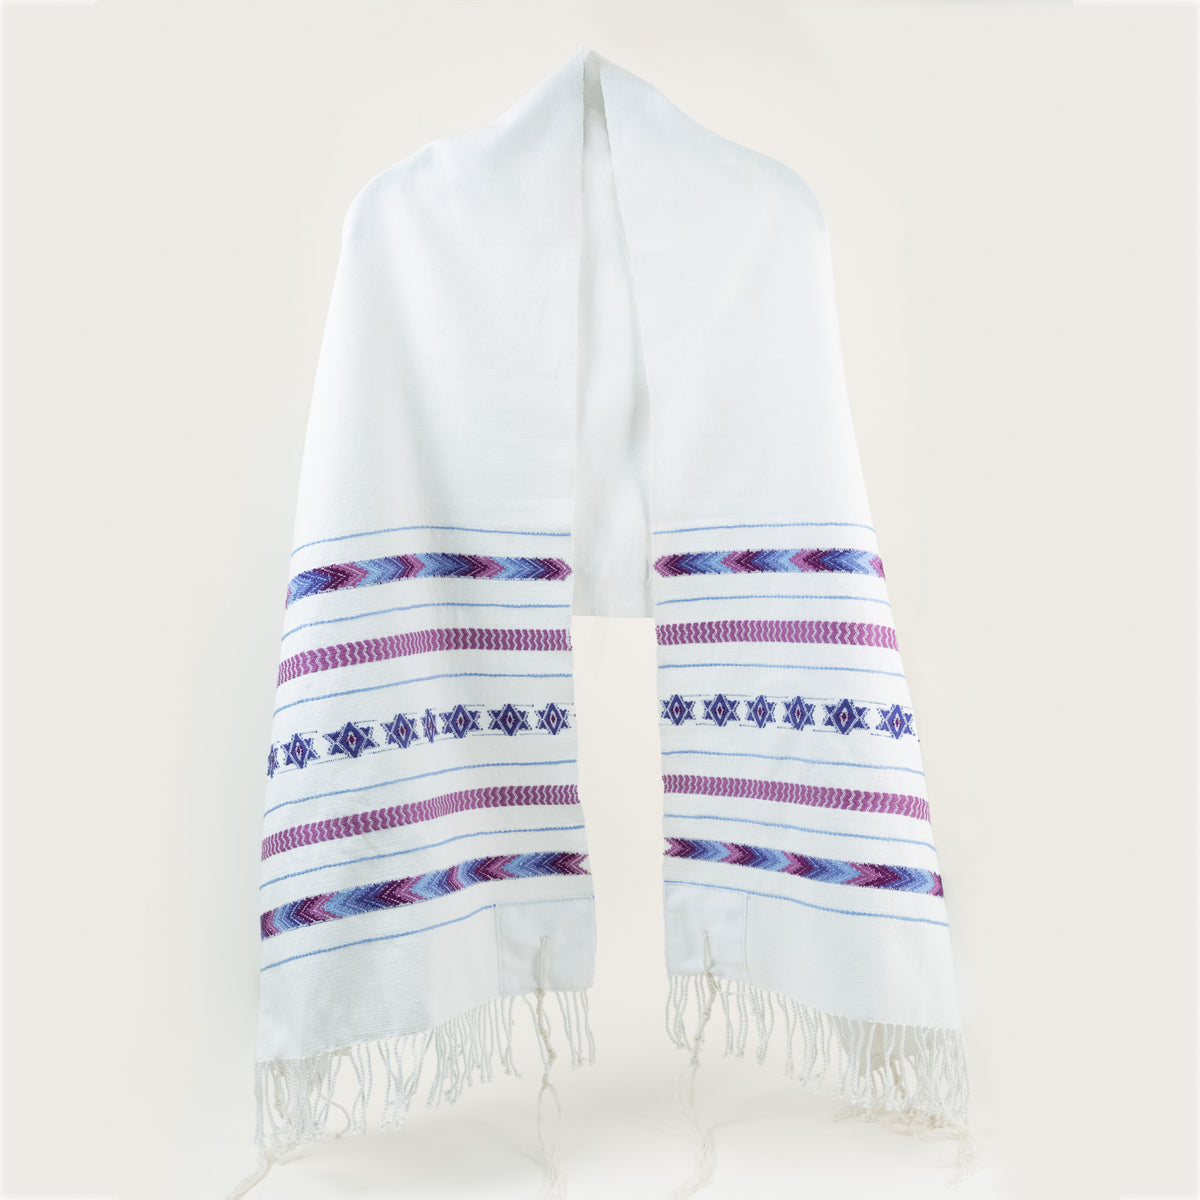 Handwoven tallit in white with purples